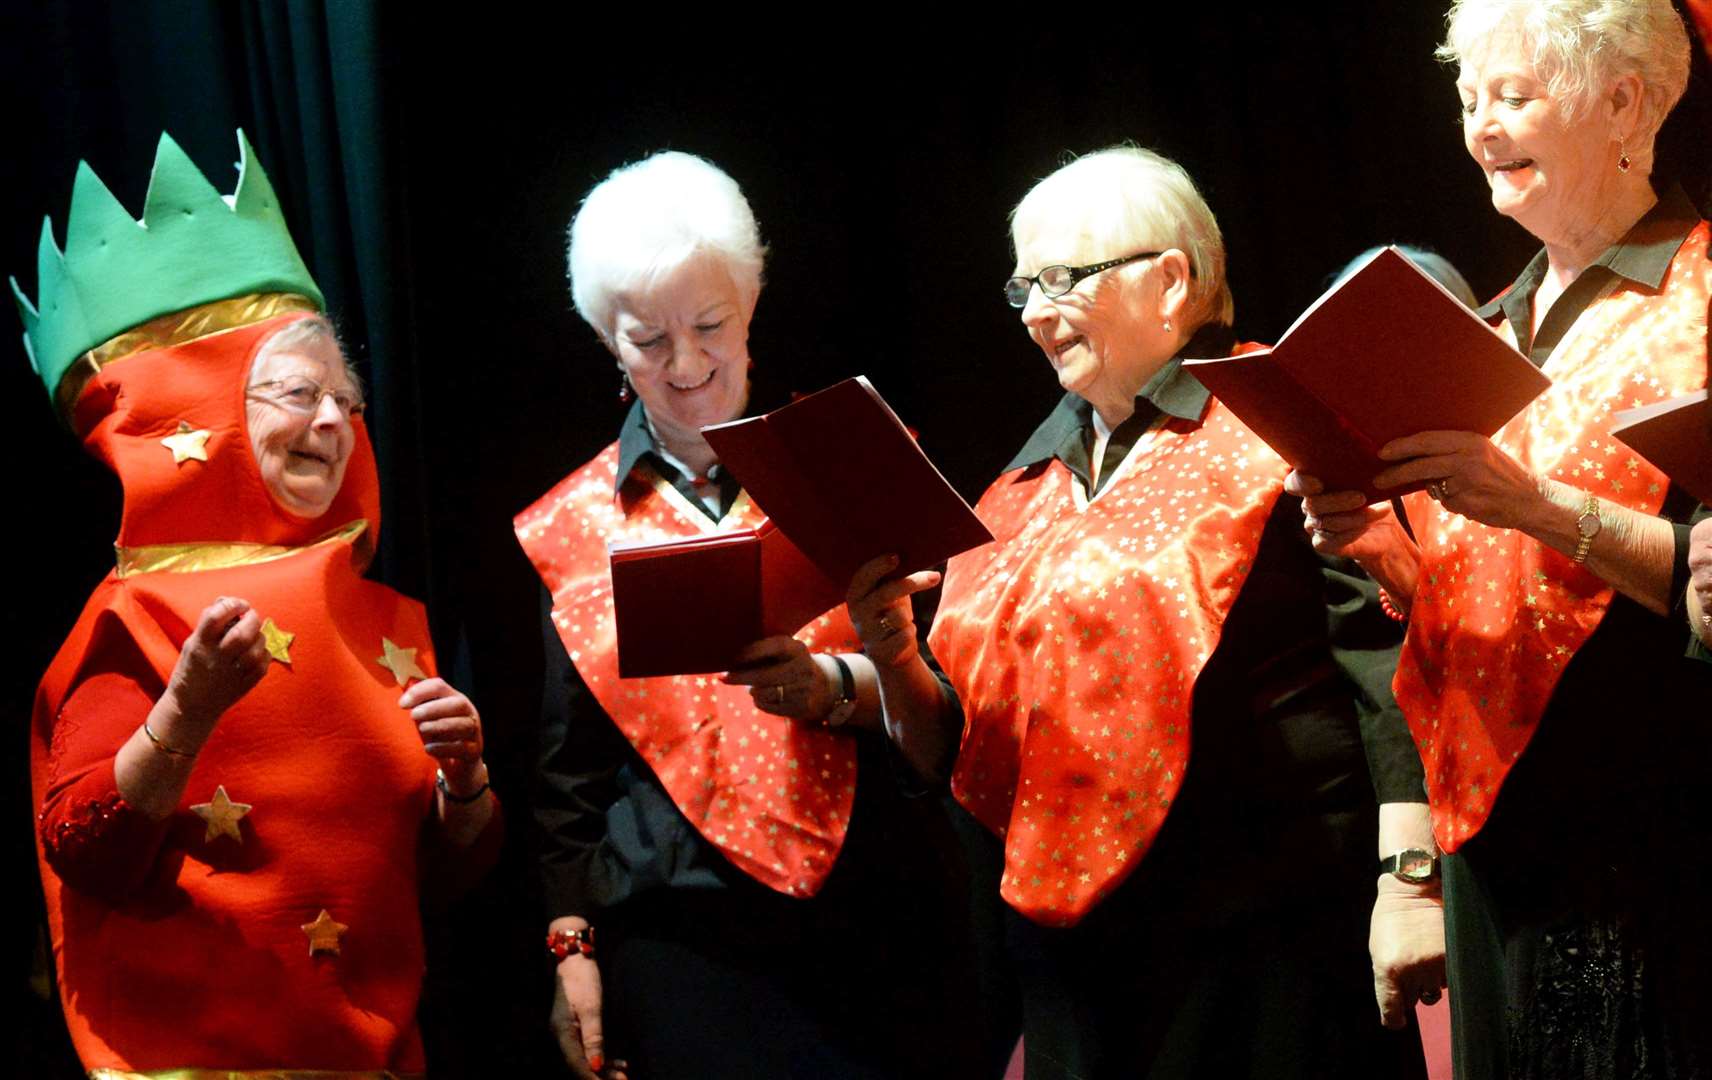 Performing I’m a Little Christmas Cracker.